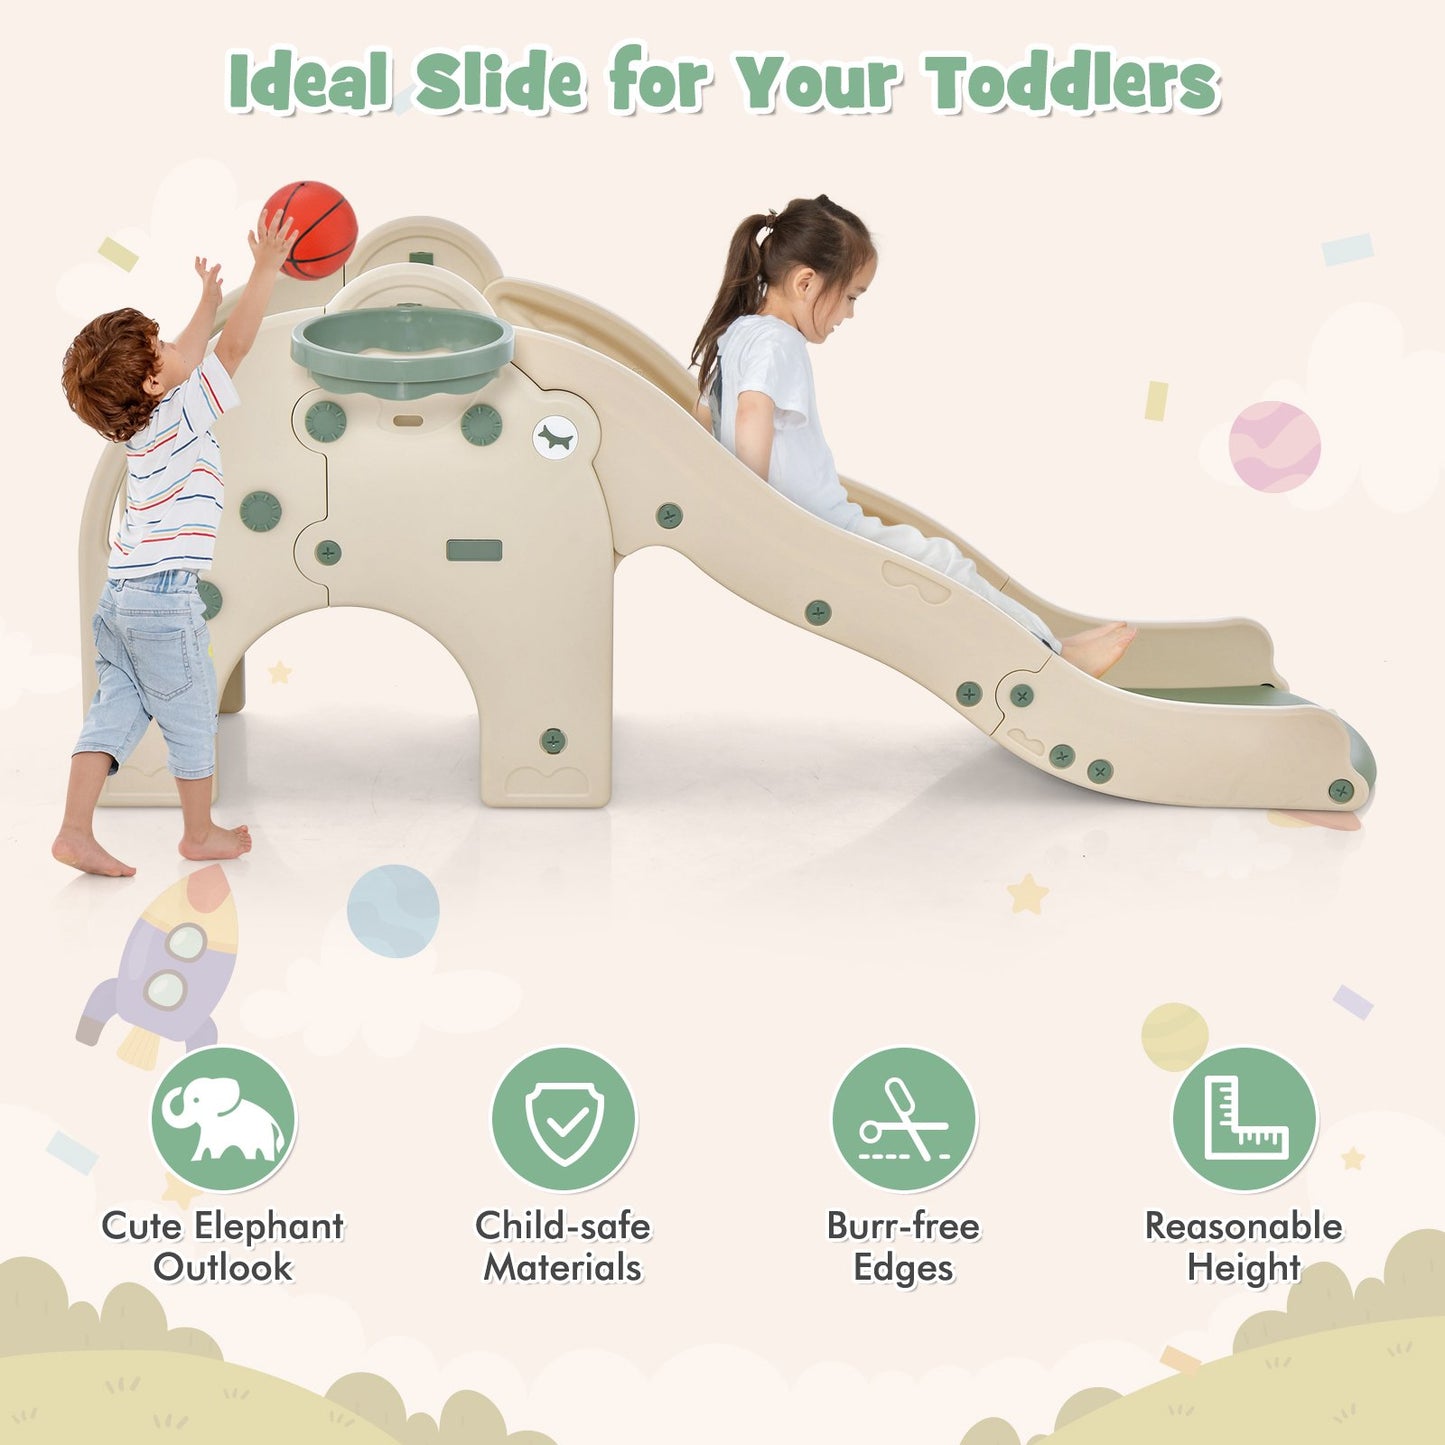 4-in-1 Toddler Slide Kids Play Slide with Cute Elephant Shape, Green